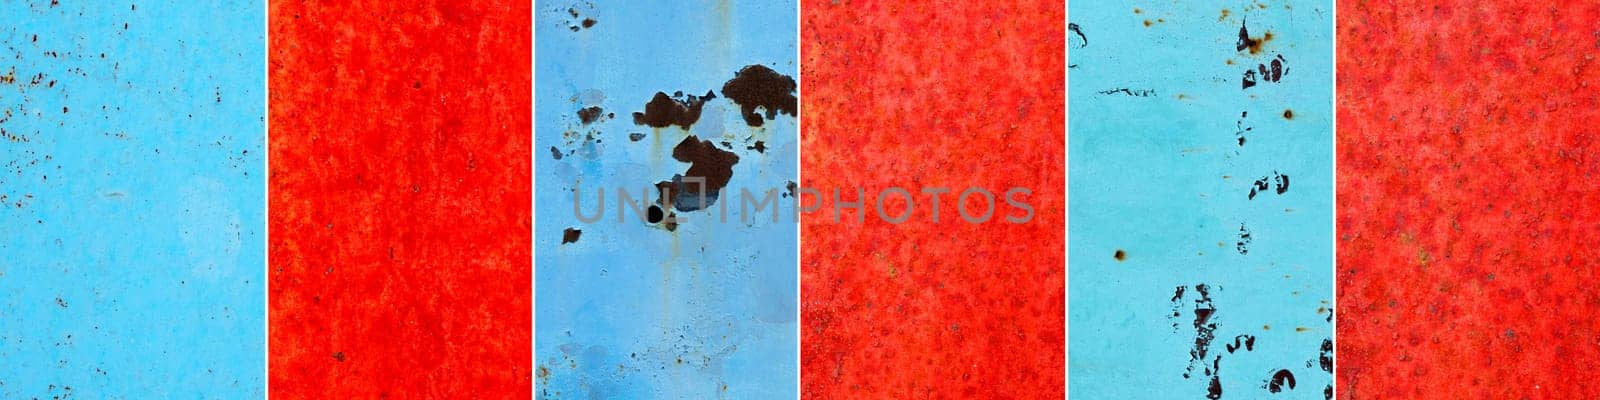 Red and blue metal and paint creating textured wall background, collage